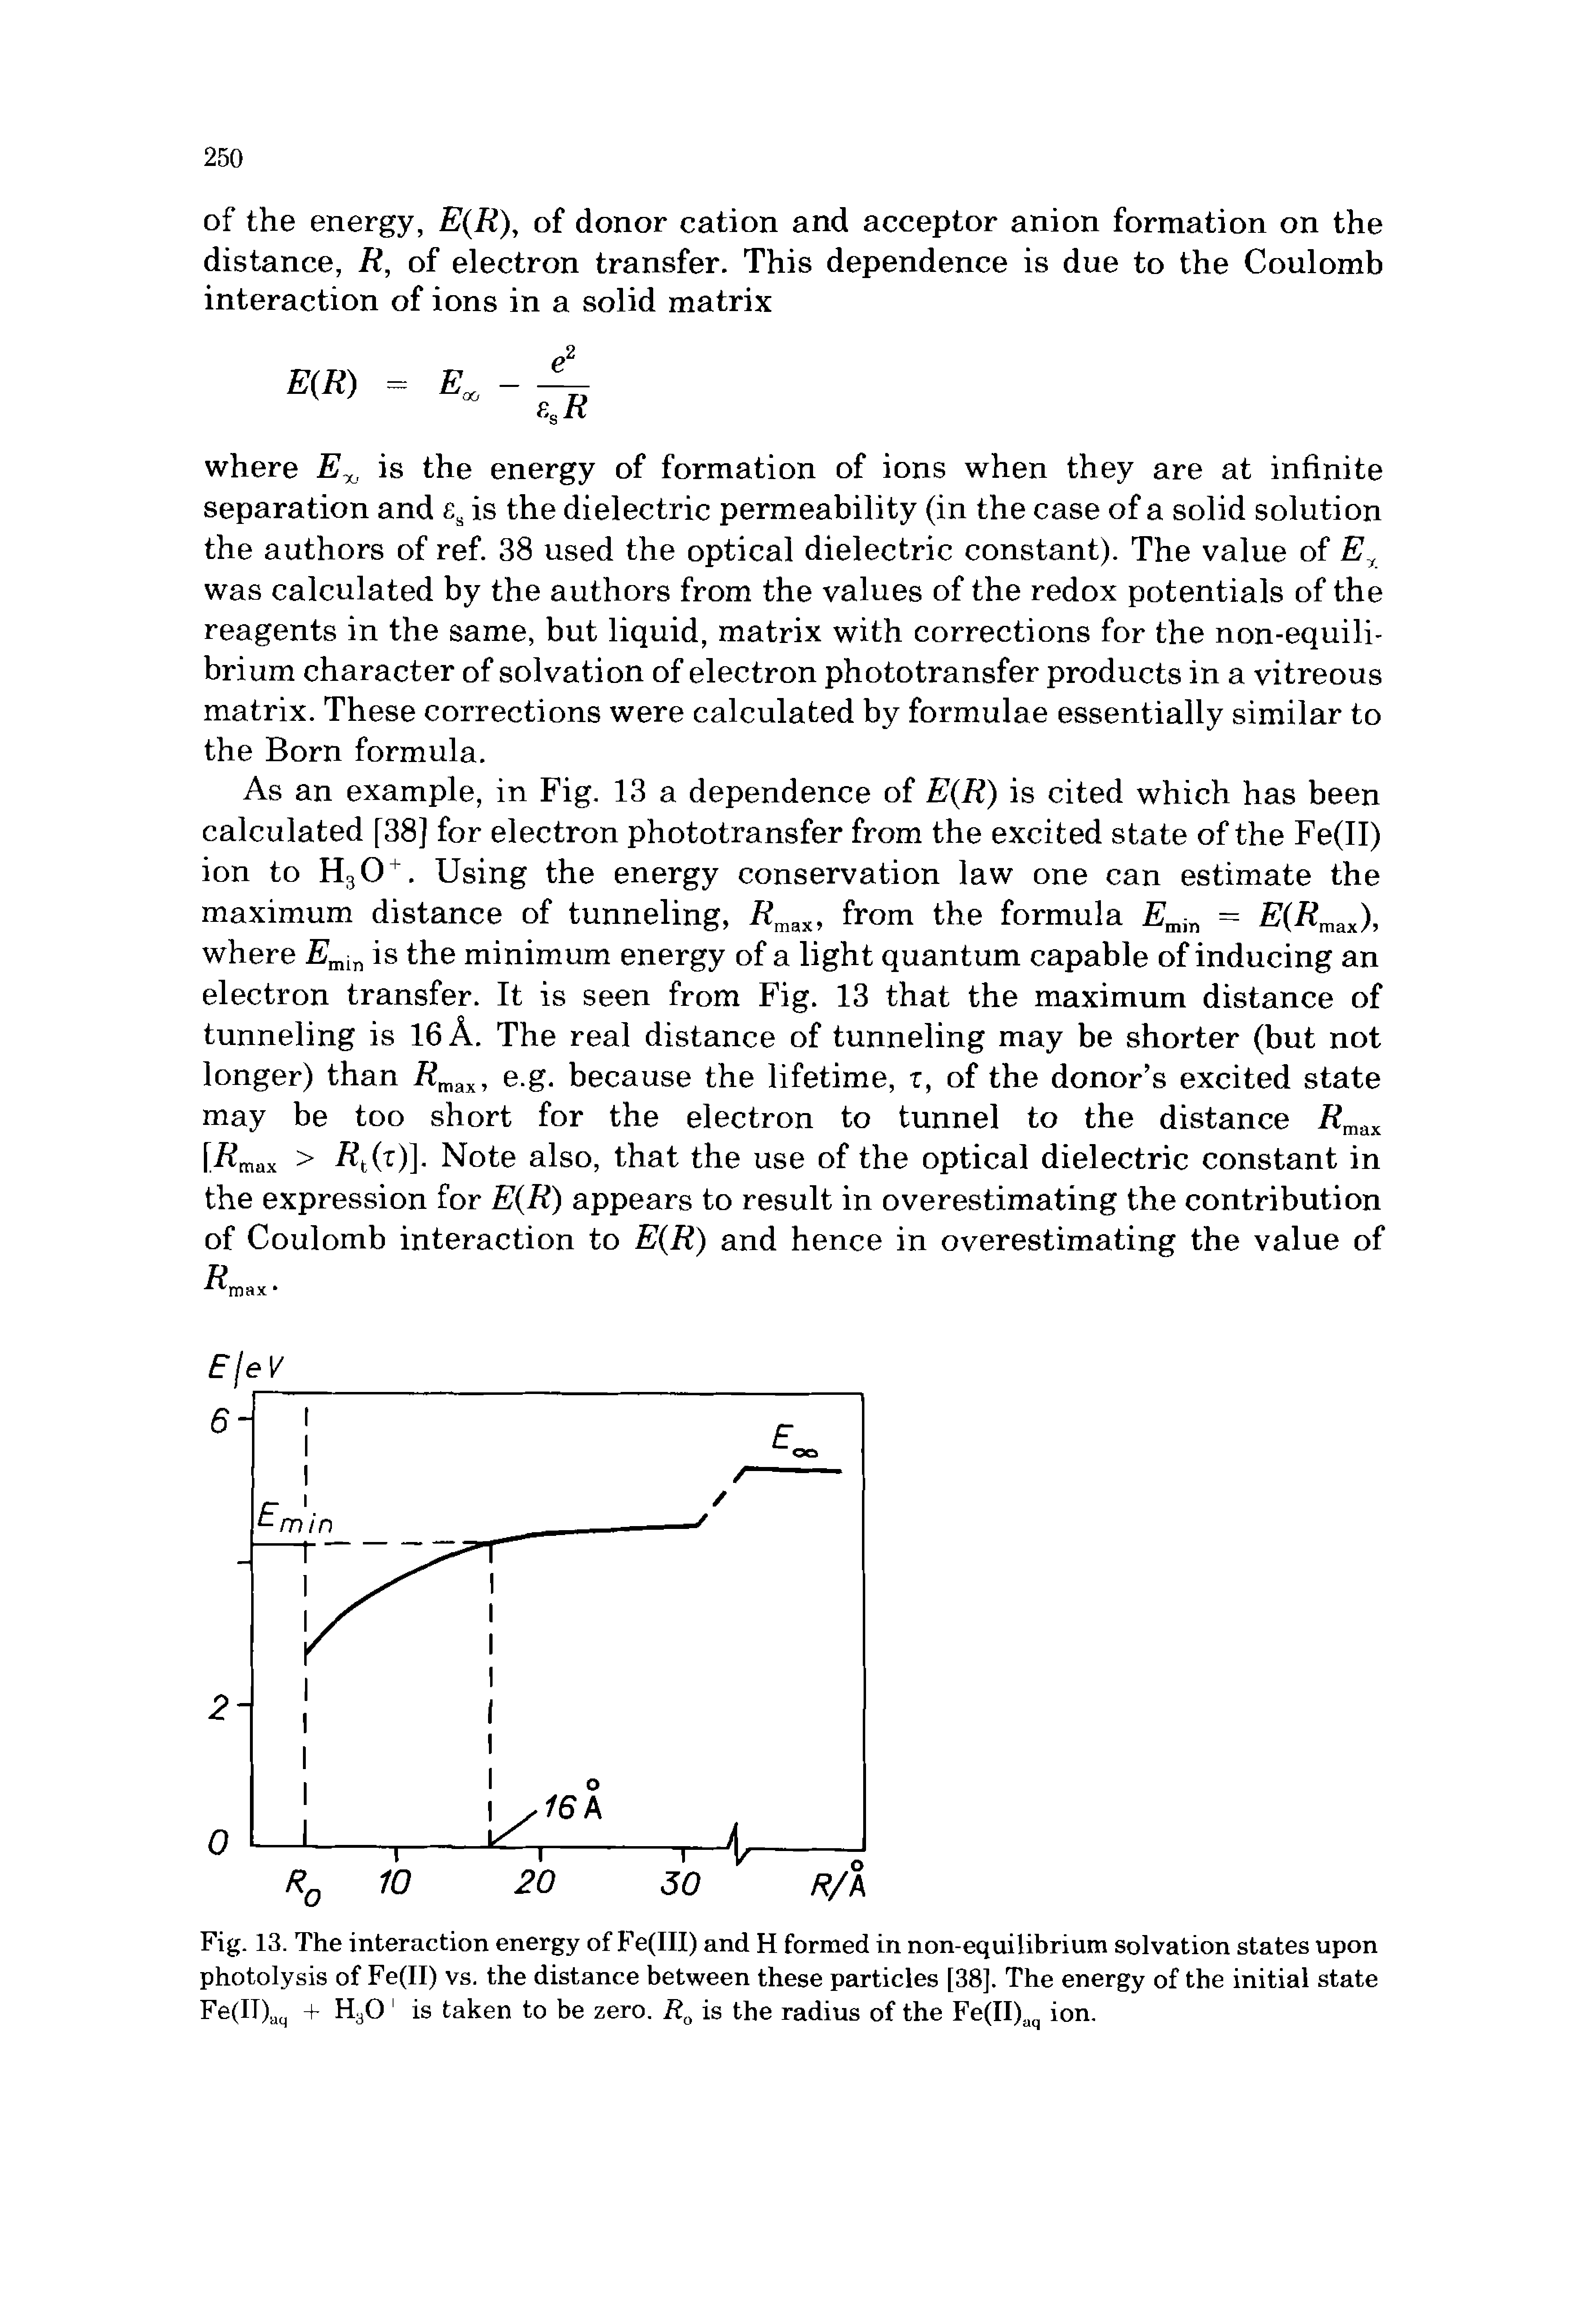 Fig. 13. The interaction energy of Fe(III) and H formed in non-equilibrium solvation states upon photolysis of Fe(II) vs. the distance between these particles [38]. The energy of the initial state Fe(IT).lq + H30 1 is taken to be zero. R0 is the radius of the Fe(II)aq ion.